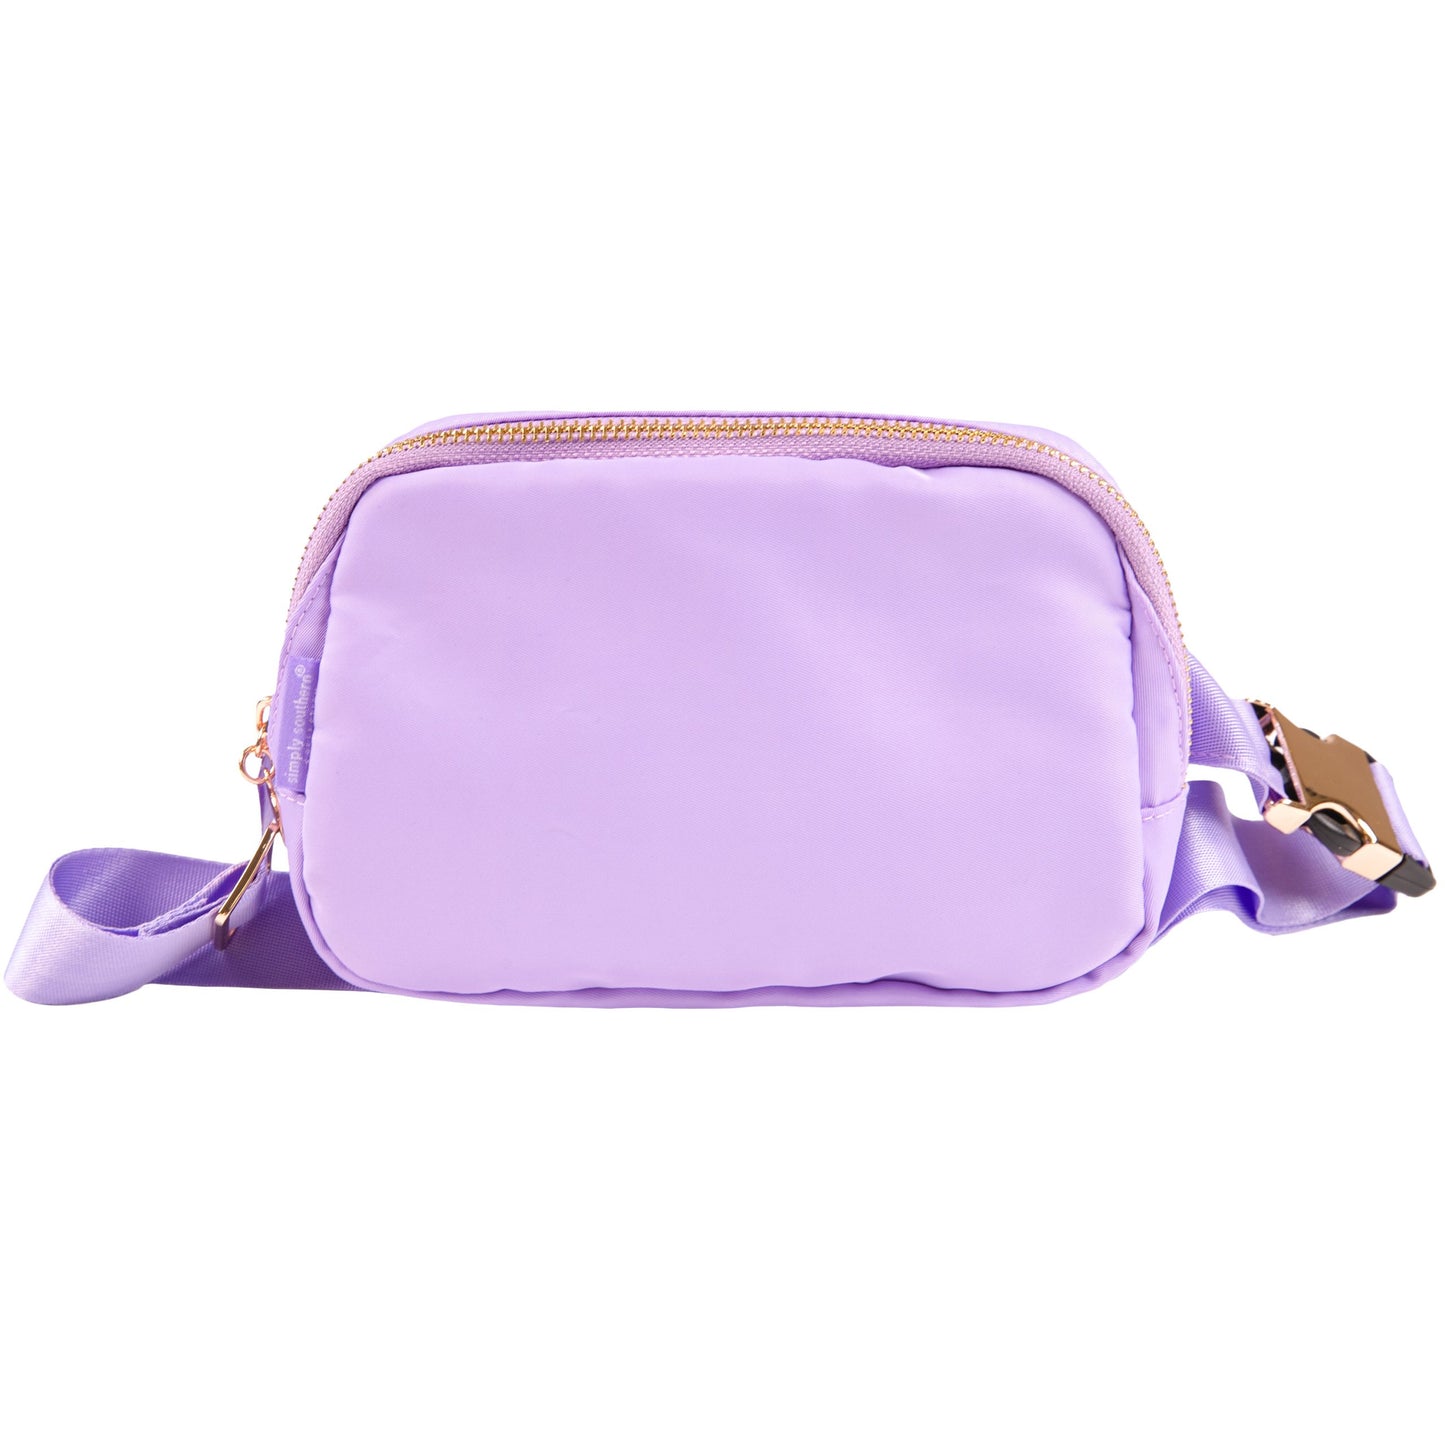 SIMPLY SOUTHERN FANNY PACK BELT LILAC